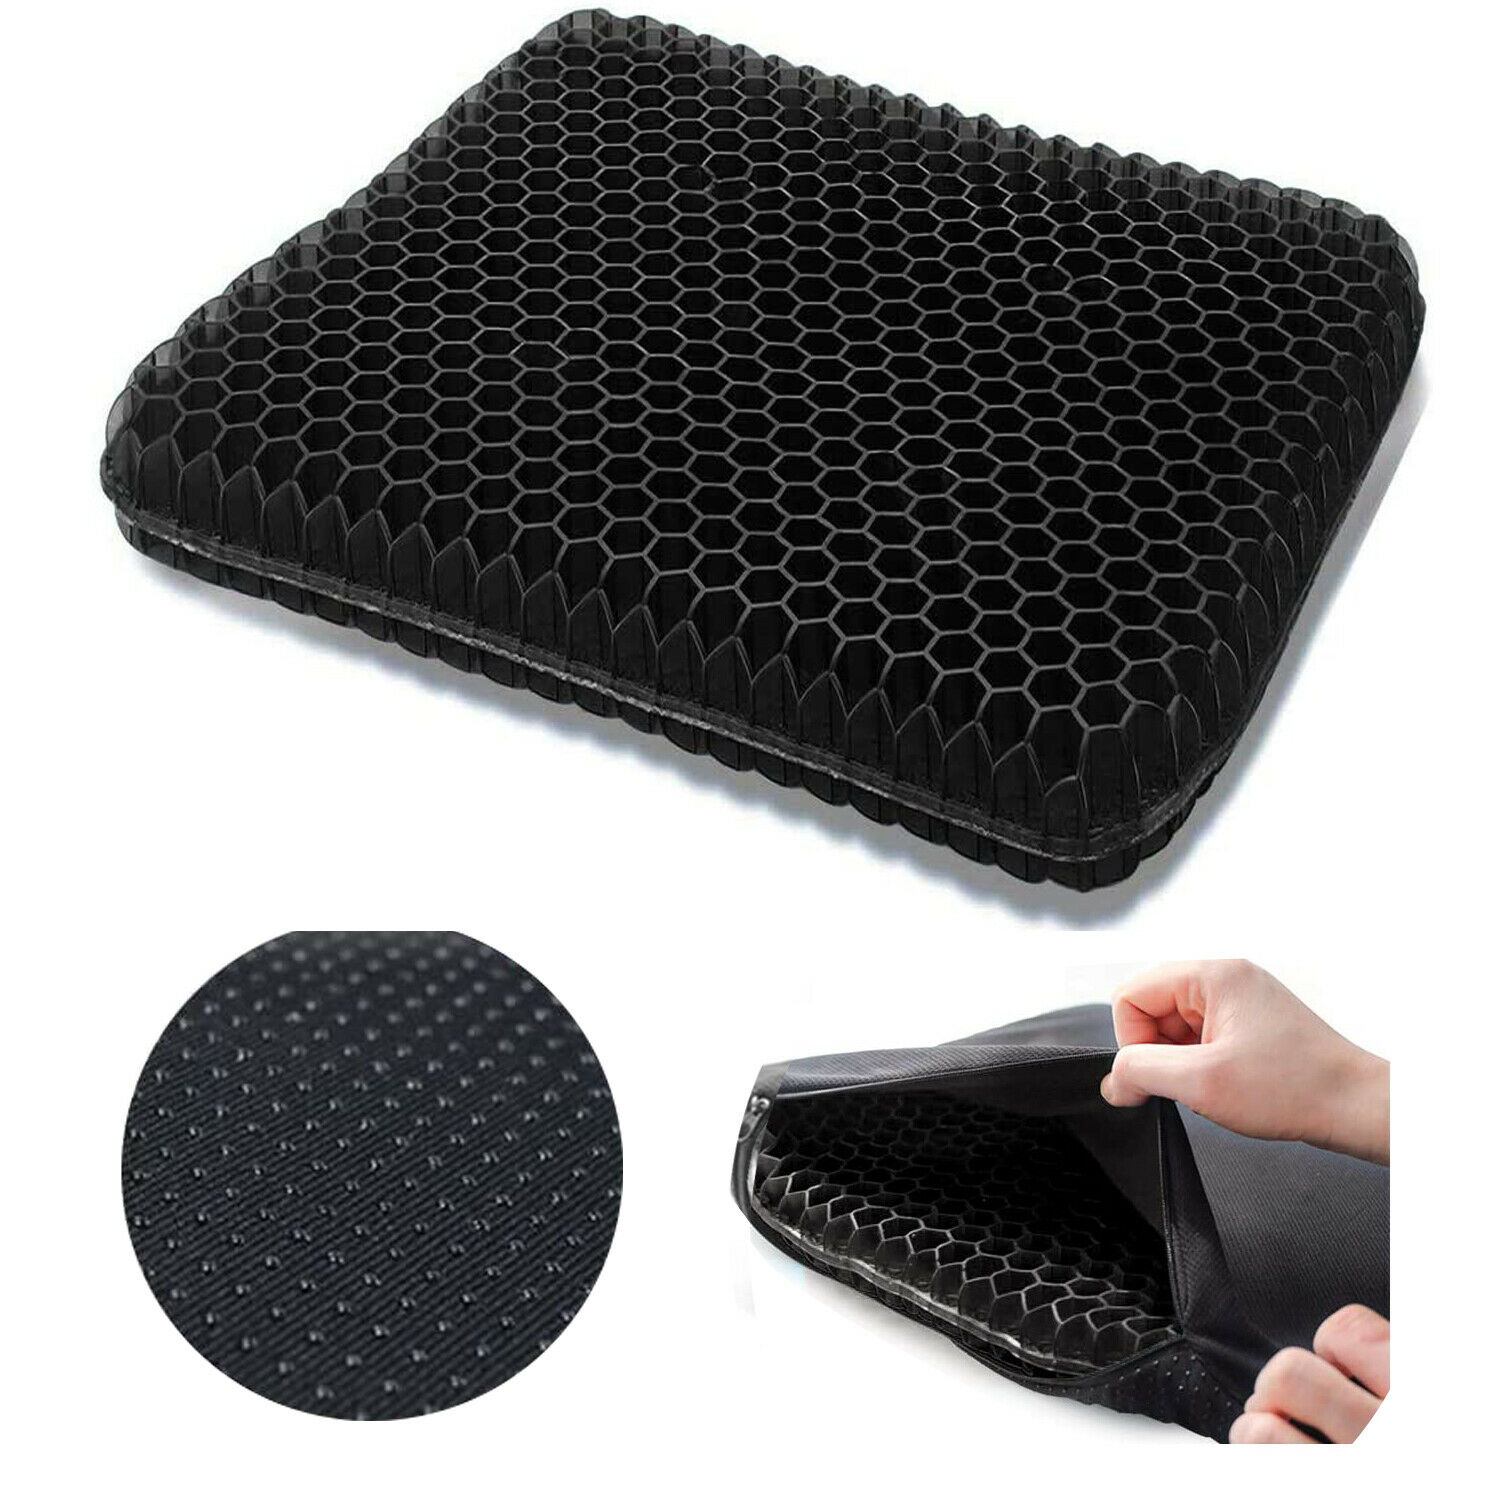 Gel Seat Cushion,double Thick Egg Seat Cushion,non-slip Cover,breathable Design